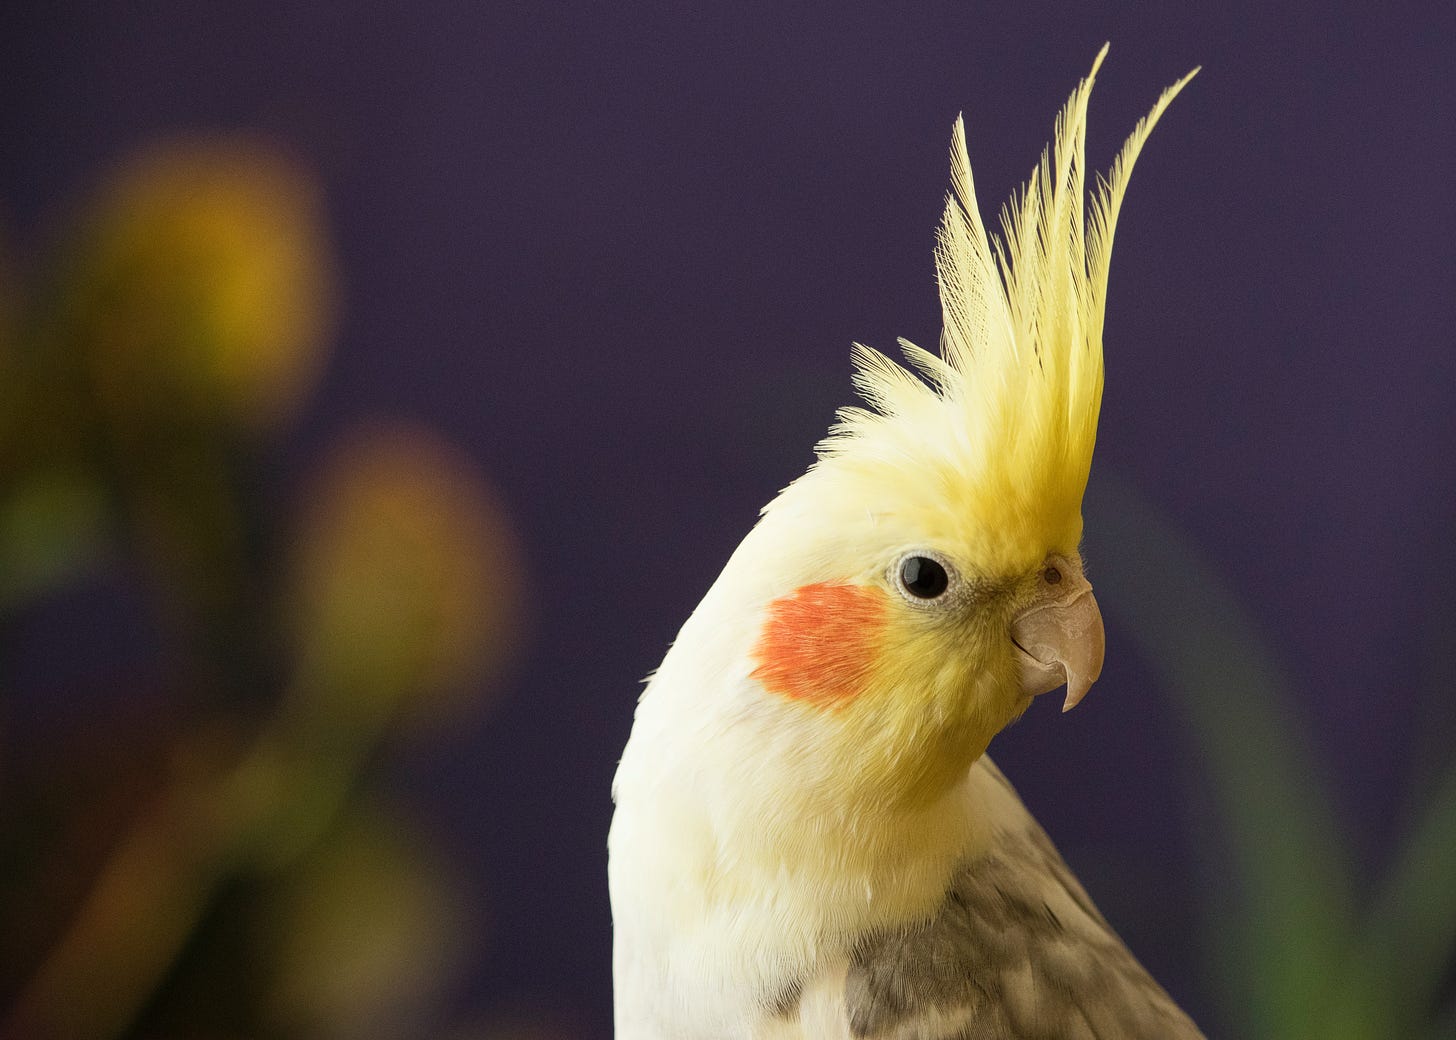 A cockatiel parrot with a bright orange cheek and yellow crest, which is standing upright and looks very adorable